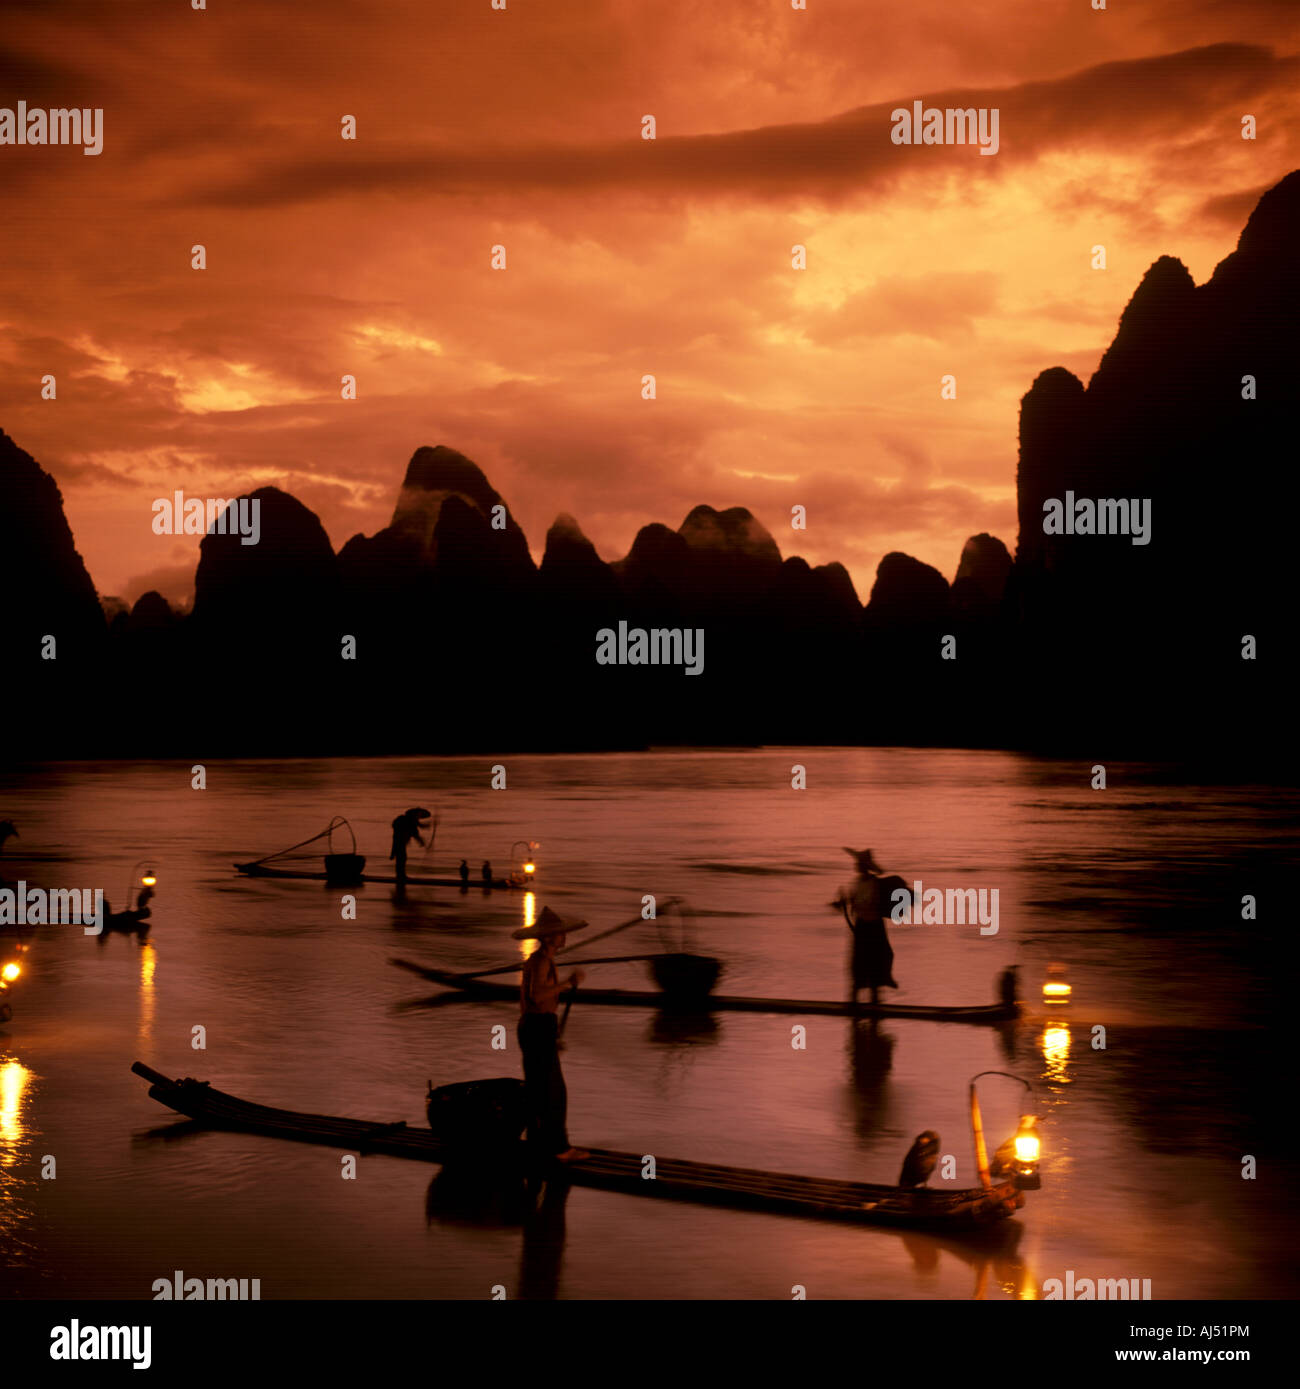 Poetic riverscape with fishermen fishing on Li River at sunset hours, Guilin landscape. Stock Photo